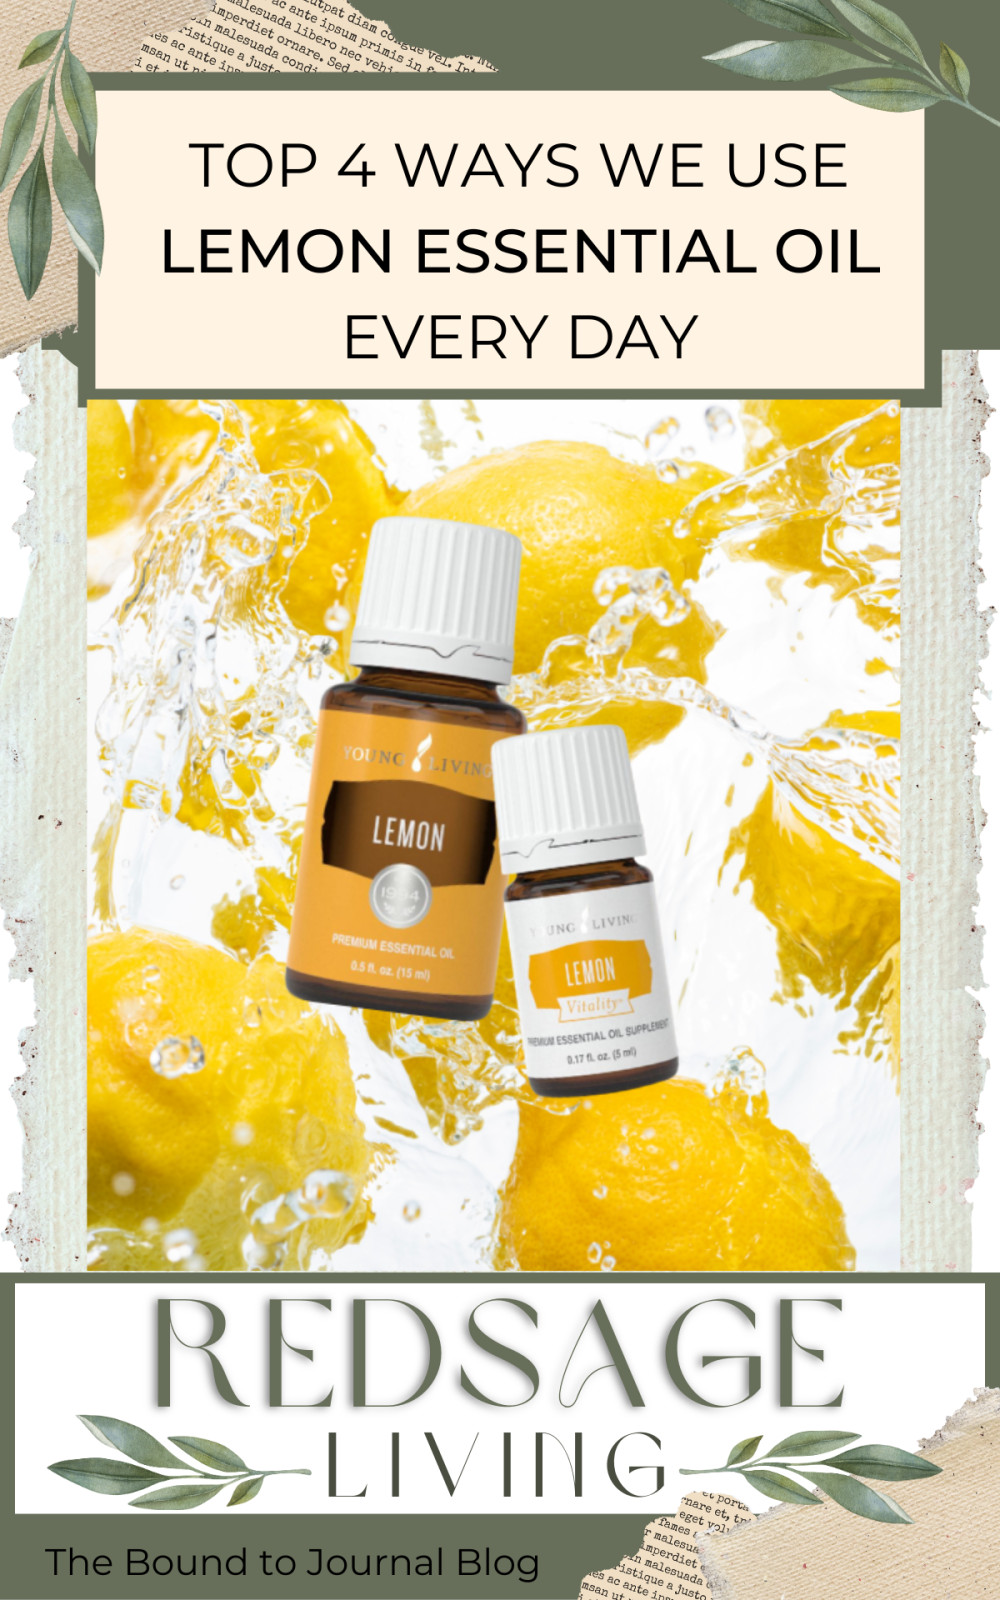 Top 4 Ways We Use Lemon Essential Oil Every Day